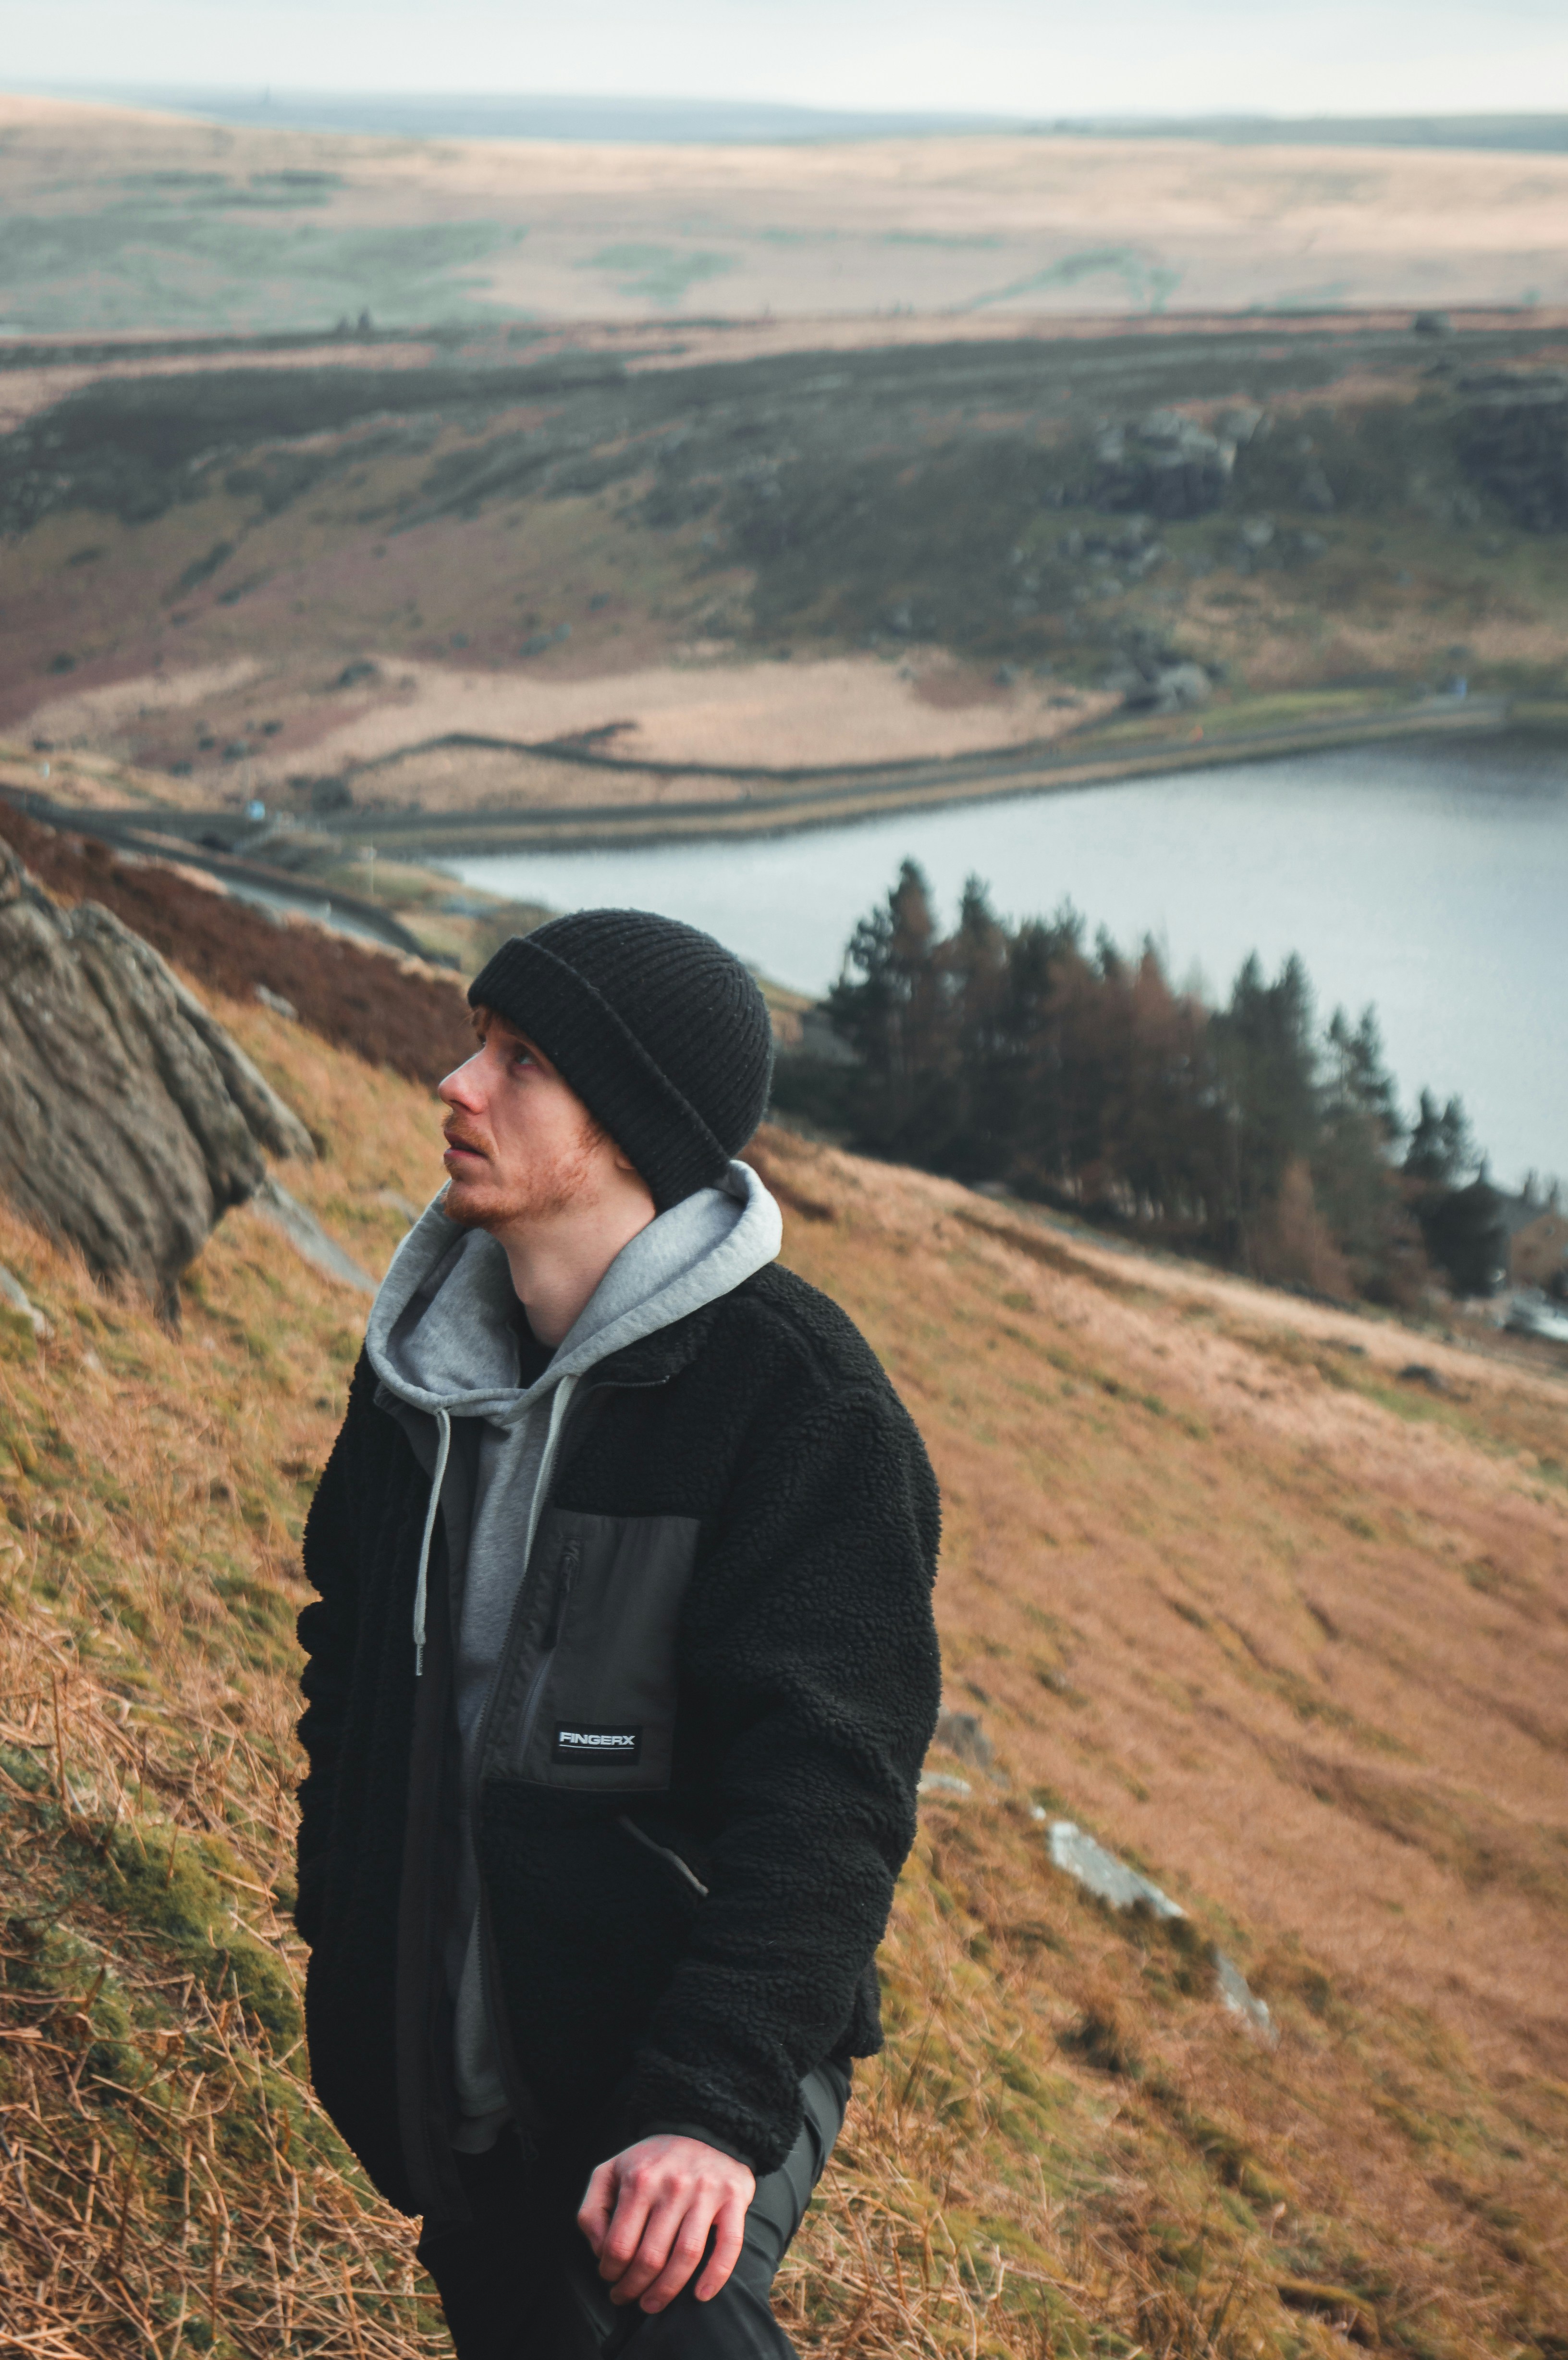 A man in a dark jacket and a hat looks into the distance, with hills and a reservoir in the background.